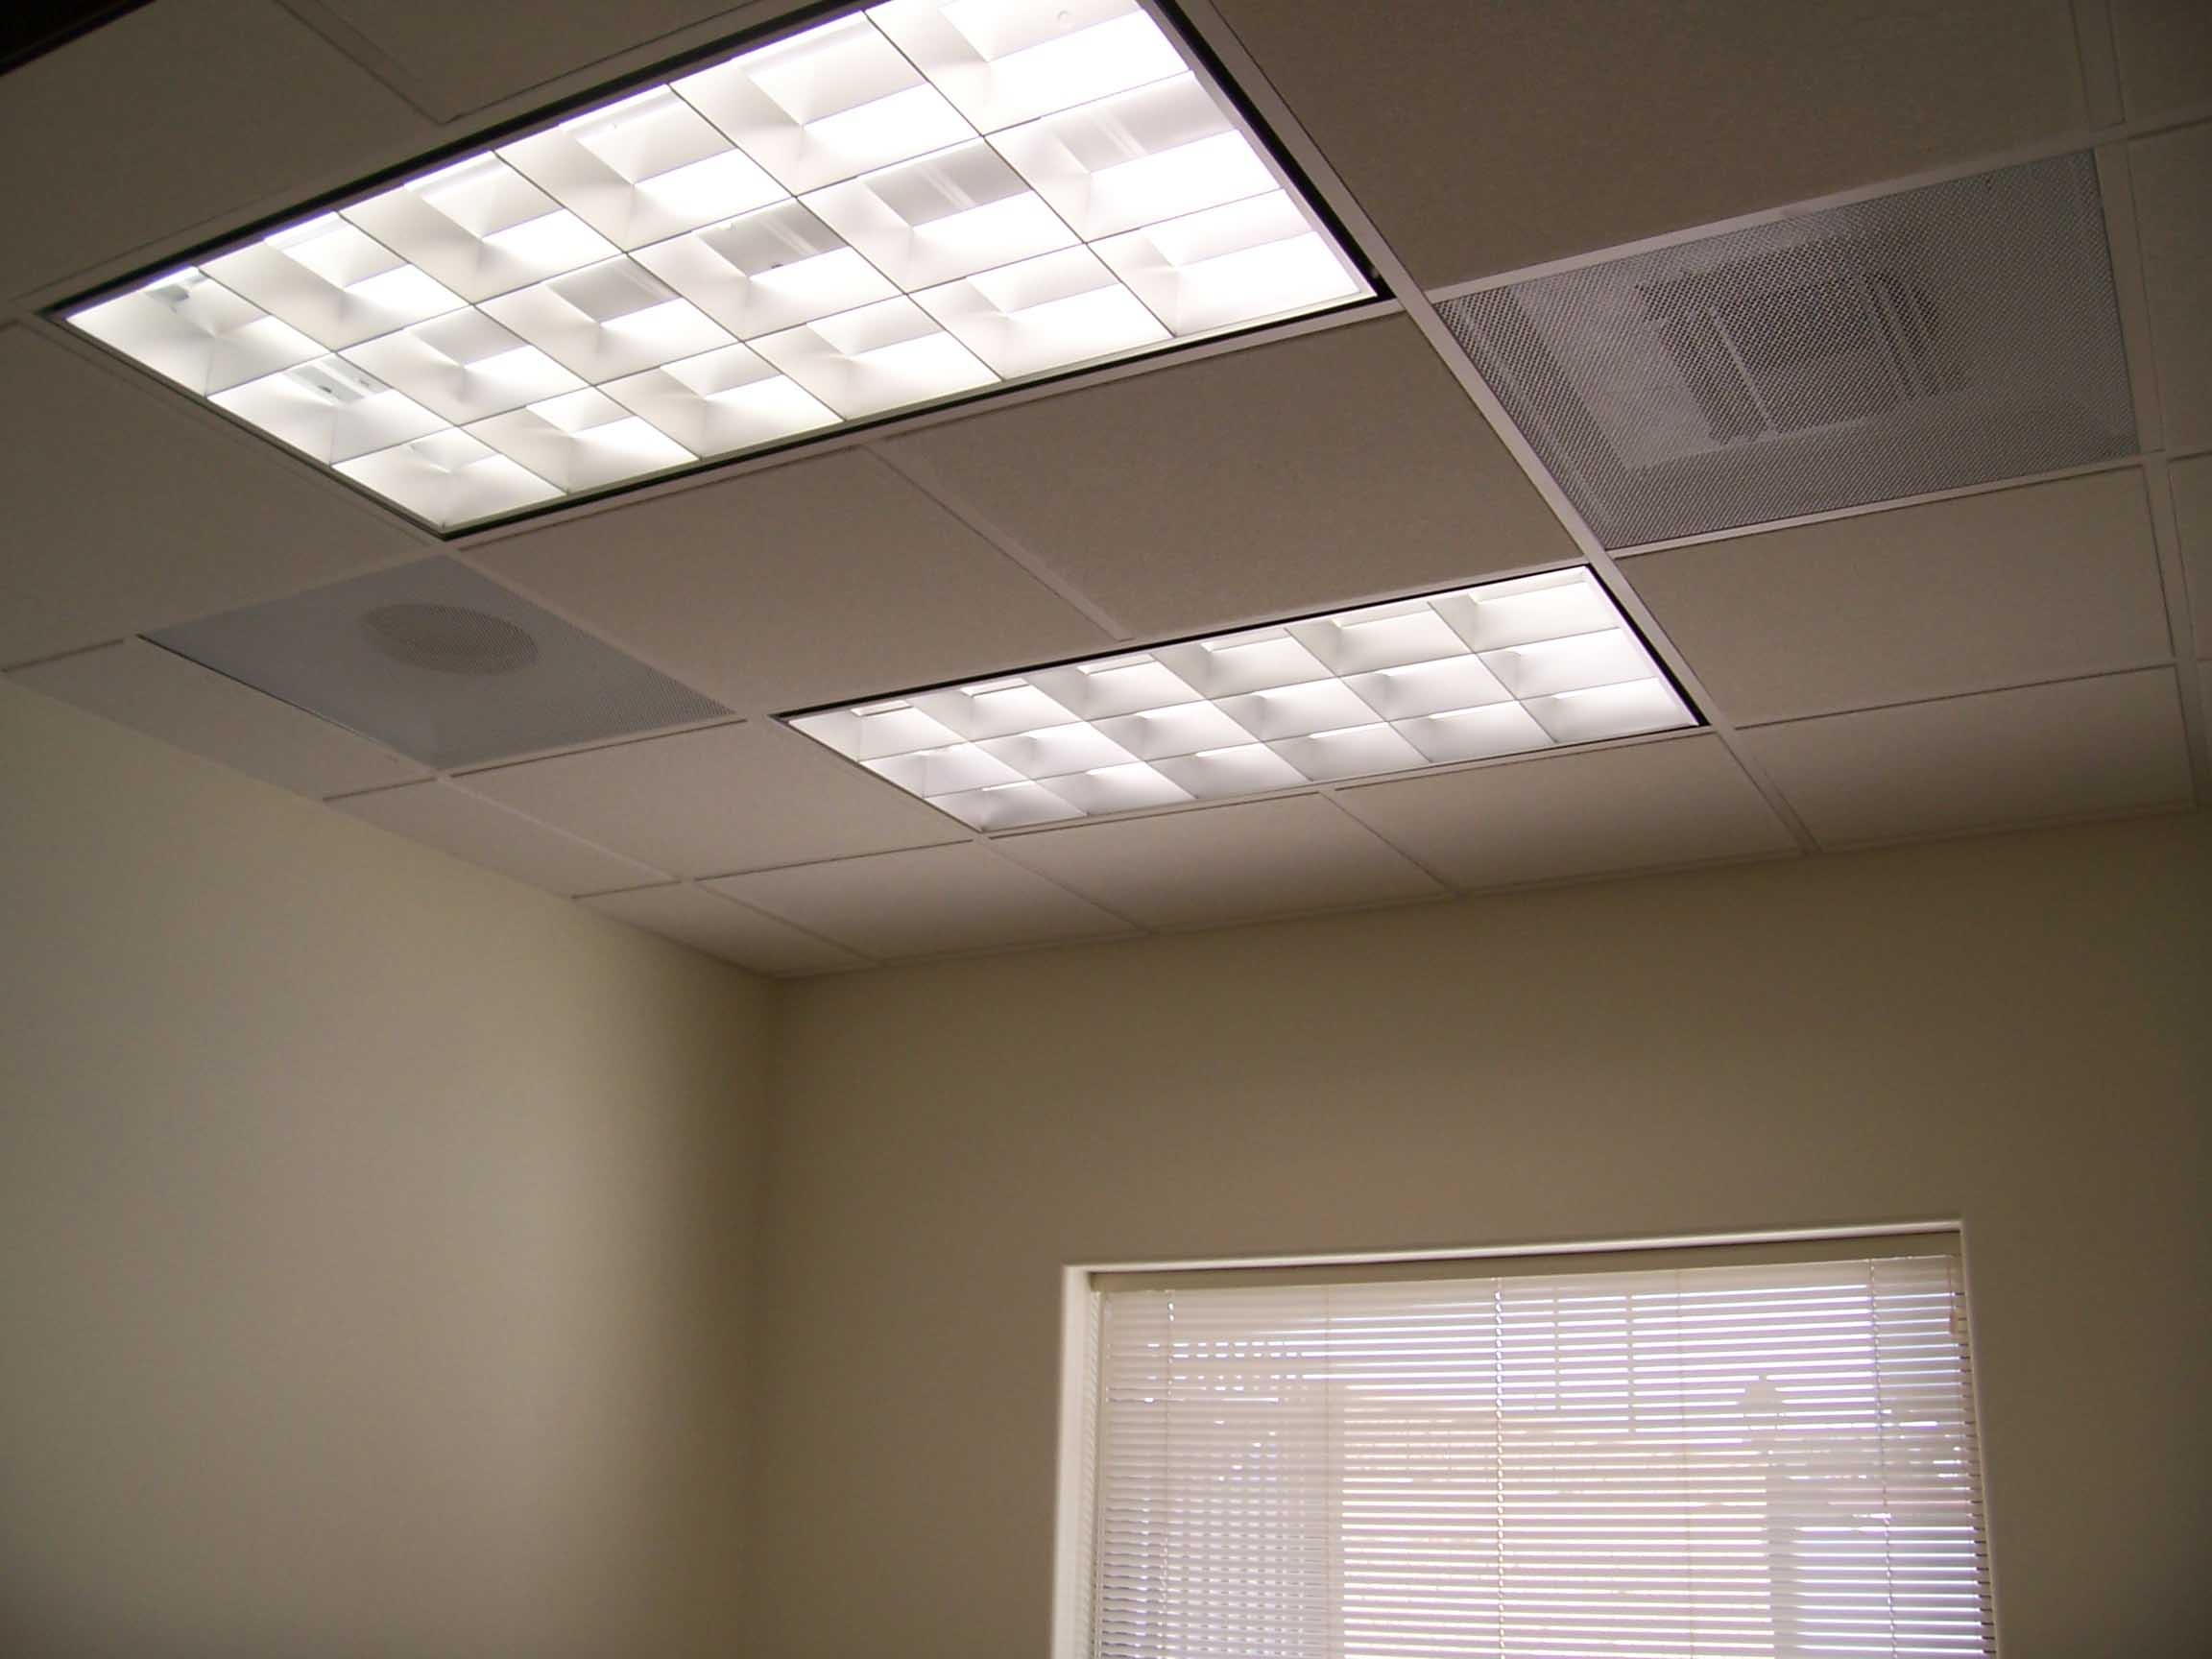 Permalink to Suspended Ceiling Fluorescent Light Covers